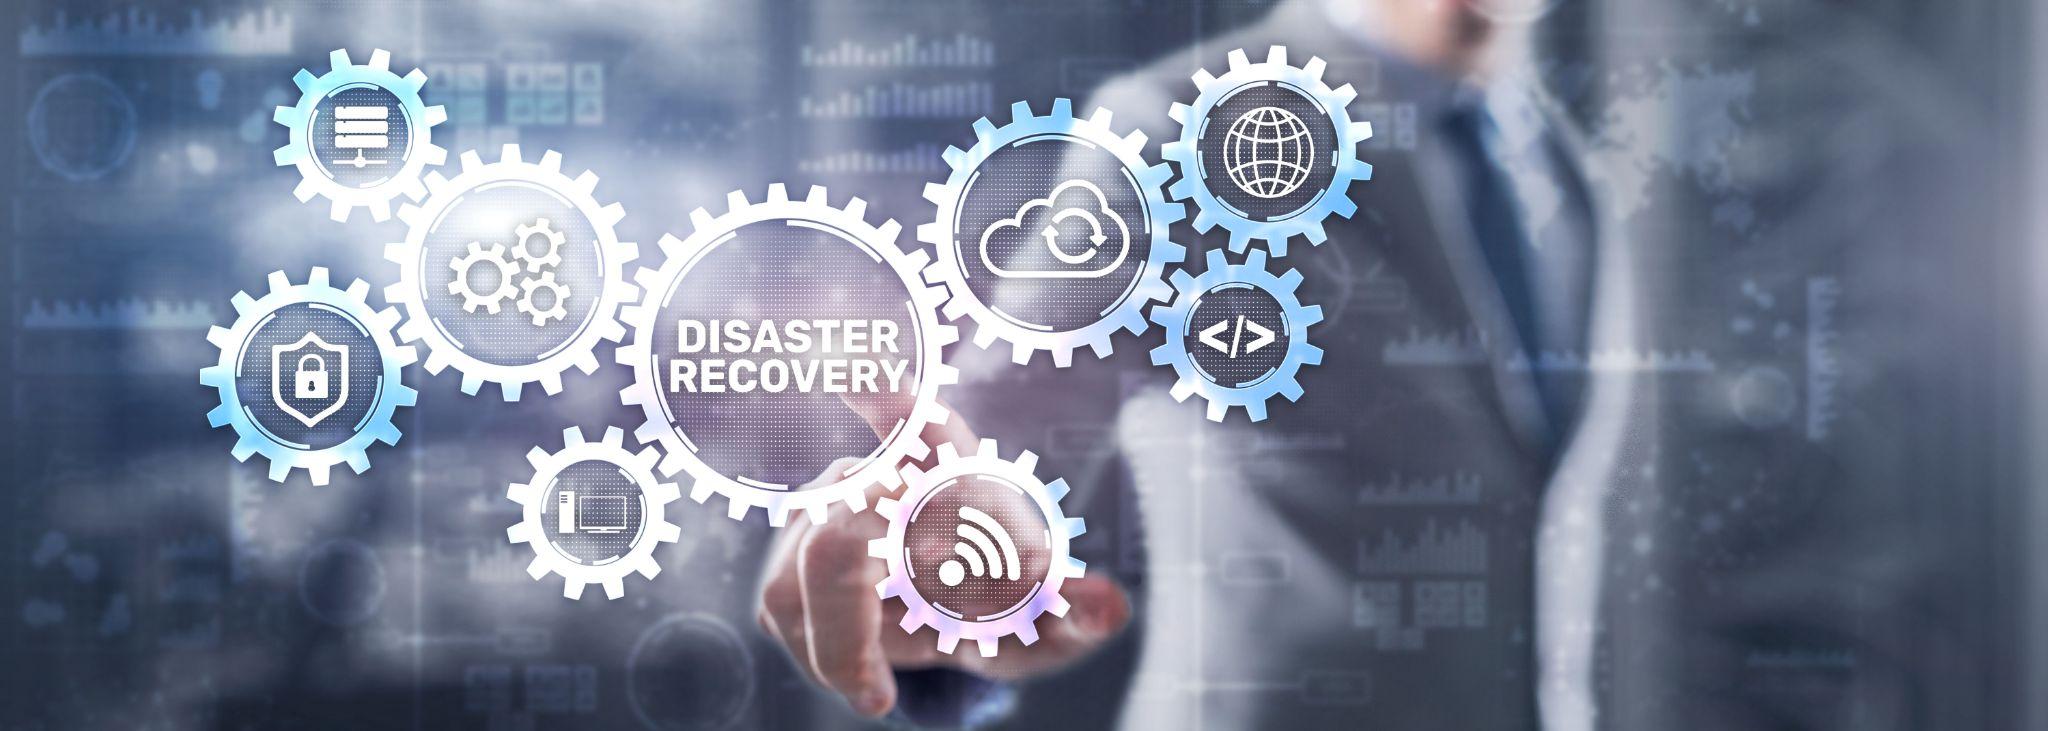 Fine-Tuning Your Disaster Recovery Communications Strategy